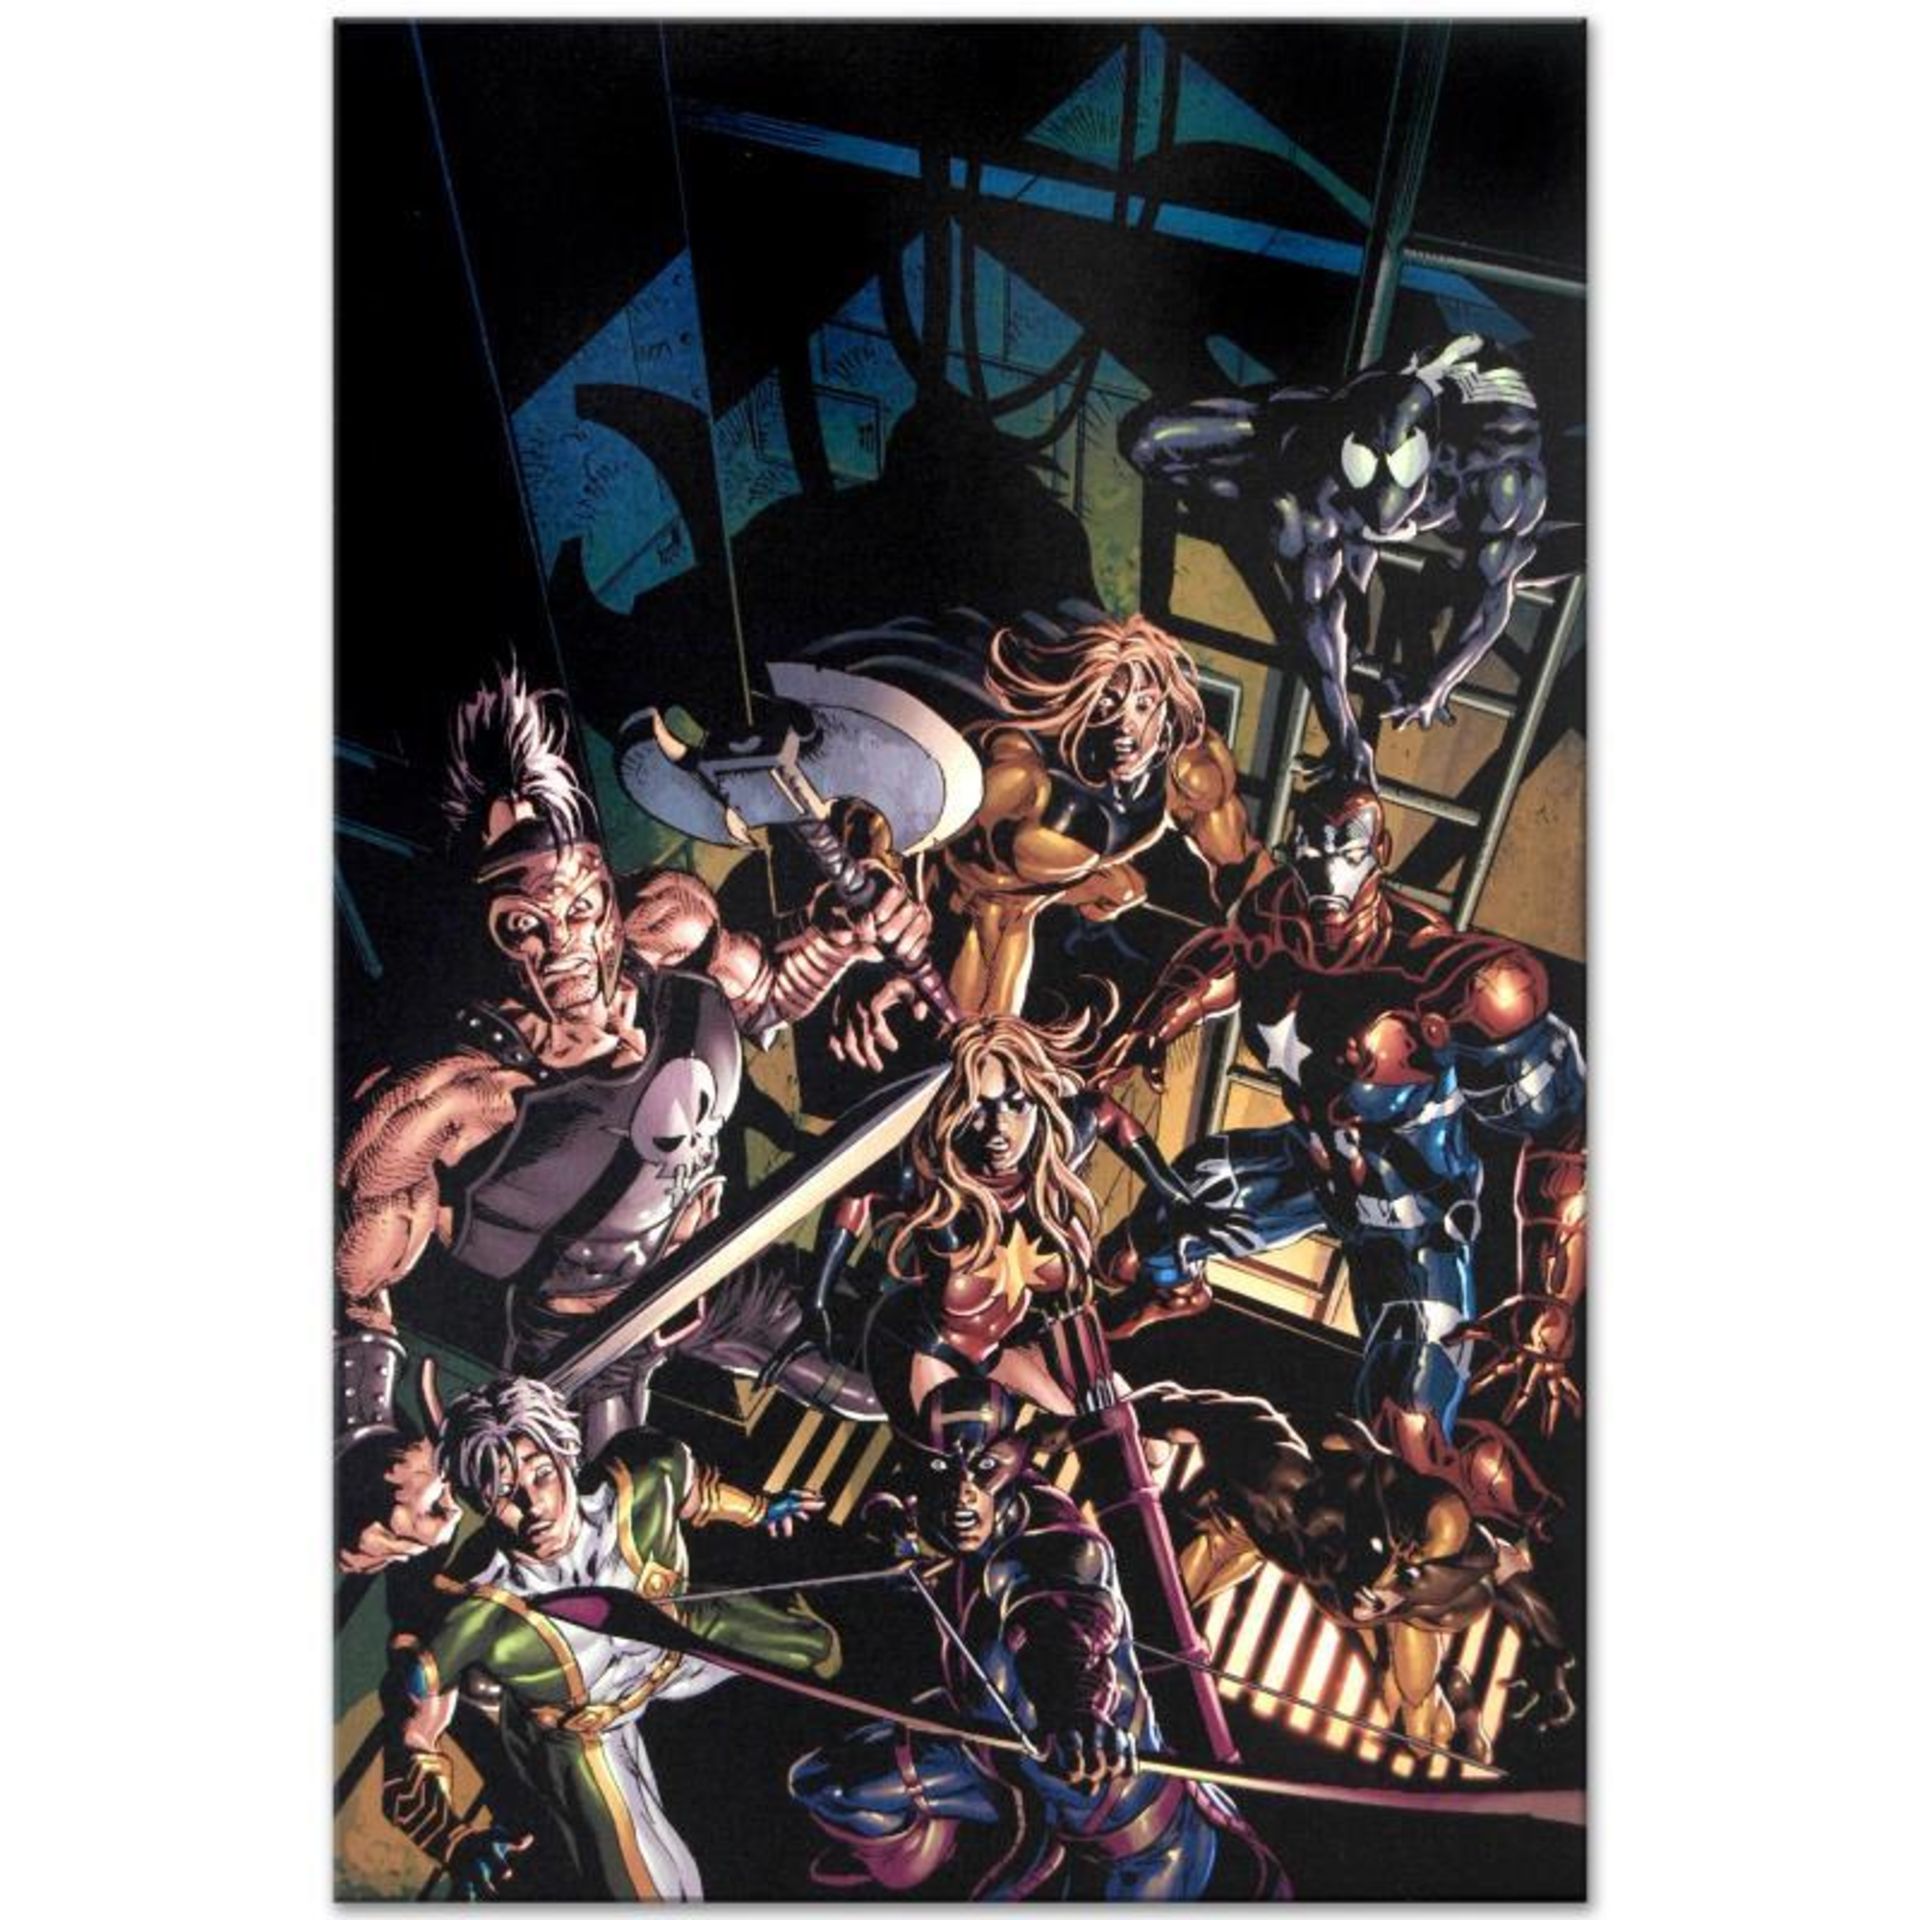 Marvel Comics "Dark Avengers #10" Numbered Limited Edition Giclee on Canvas by M